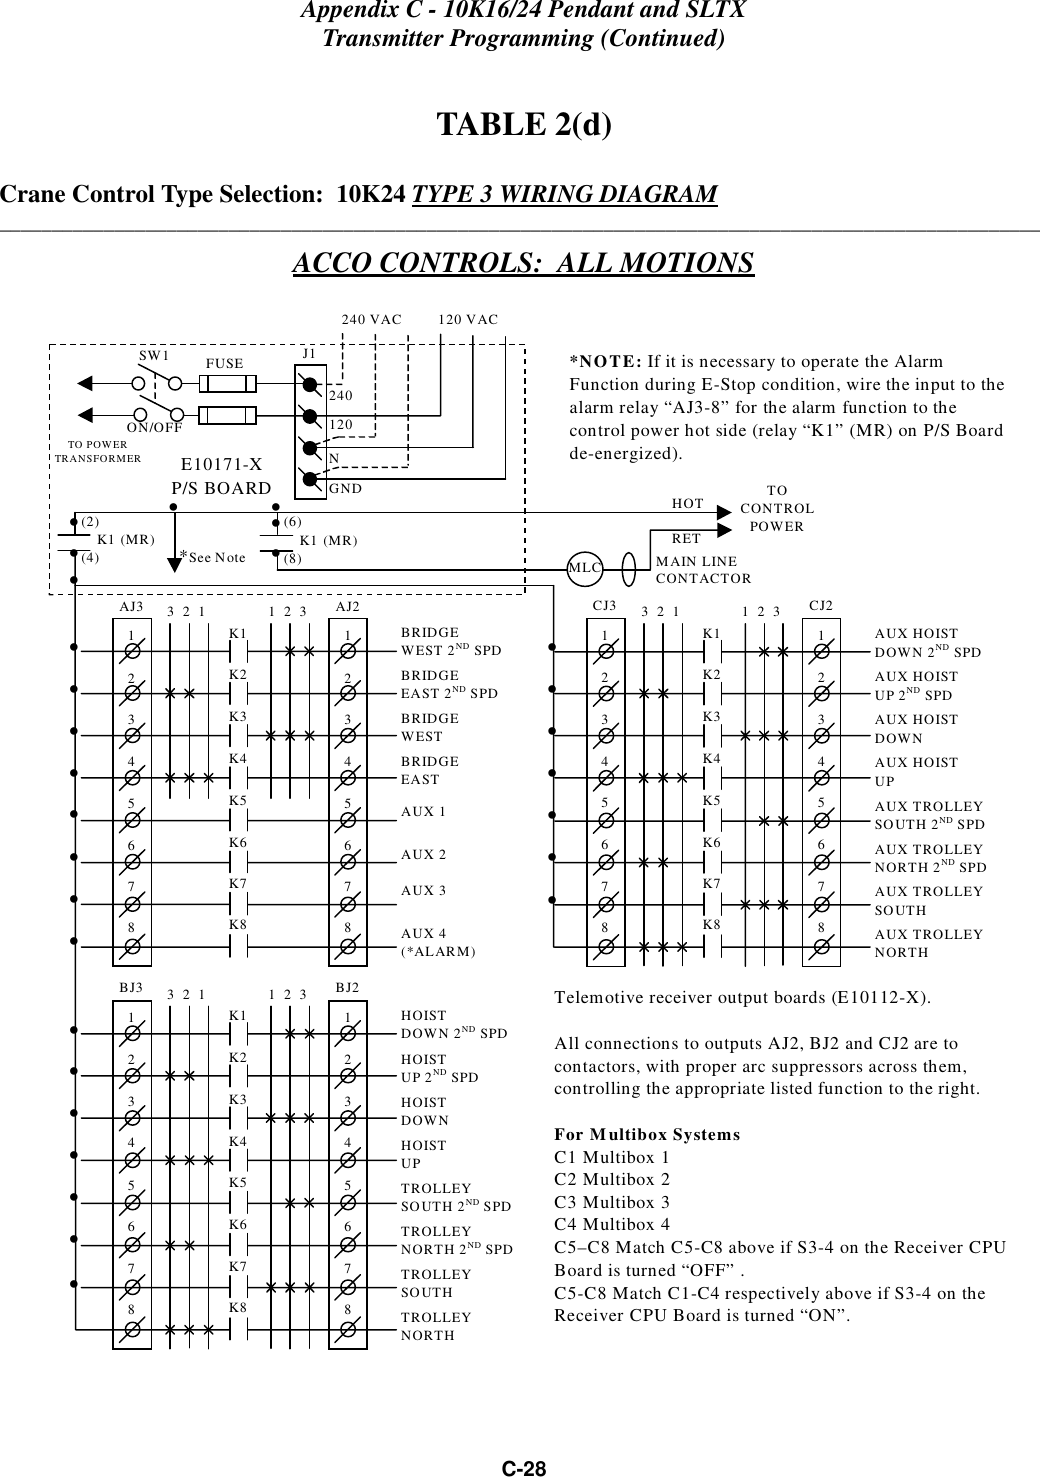 Appendix C - 10K16/24 Pendant and SLTXTransmitter Programming (Continued)C-28TABLE 2(d)Crane Control Type Selection:  10K24 TYPE 3 WIRING DIAGRAM____________________________________________________________________________________________________ACCO CONTROLS:  ALL MOTIONSCJ312345678CJ212345678K1K2K3K4K5K6K7K83  2  1 1  2  3AUX HOISTDOWN 2ND SPDAUX HOISTUP 2ND SPDAUX HOISTDOWNAUX HOISTUPAUX TROLLEYSOUTH 2ND SPDAUX TROLLEYNORTH 2ND SPDAUX TROLLEYSOUTHAUX TROLLEYNORTH• • • • • • • BJ312345678BJ212345678K1K2K3K4K5K6K7K83  2  1 1  2  3HOISTDOWN 2ND SPDHOISTUP 2ND SPDHOISTDOWNHOISTUPTROLLEYSOUTH 2ND SPDTROLLEYNORTH 2ND SPDTROLLEYSOUTHTROLLEYNORTH• • • • • • AJ312345678AJ212345678K1K2K3K4K5K6K7K83  2  1 1  2  3BRIDGEWEST 2ND SPDBRIDGEEAST 2ND SPDBRIDGEWESTBRIDGEEASTAUX 1AUX 2AUX 3AUX 4(*ALARM)• • • • • • • • *NOTE: If it is necessary to operate the AlarmFunction during E-Stop condition, wire the input to thealarm relay “AJ3-8” for the alarm function to thecontrol power hot side (relay “K1” (MR) on P/S Boardde-energized).240 VAC         120 VACSW1ON/OFFTO POWERTRANSFORMER E10171-XP/S BOARDMAIN LINECONTACTORTOCONTROLPOWERMLCHOTRET(2)    K1   (MR)(4)• • • *See Note• 240120FUSE J1NGND(6)    K1   (MR)(8)• • • • Telemotive receiver output boards (E10112-X).All connections to outputs AJ2, BJ2 and CJ2 are tocontactors, with proper arc suppressors across them,controlling the appropriate listed function to the right.For Multibox SystemsC1 Multibox 1C2 Multibox 2C3 Multibox 3C4 Multibox 4C5–C8 Match C5-C8 above if S3-4 on the Receiver CPUBoard is turned “OFF” .C5-C8 Match C1-C4 respectively above if S3-4 on theReceiver CPU Board is turned “ON”.